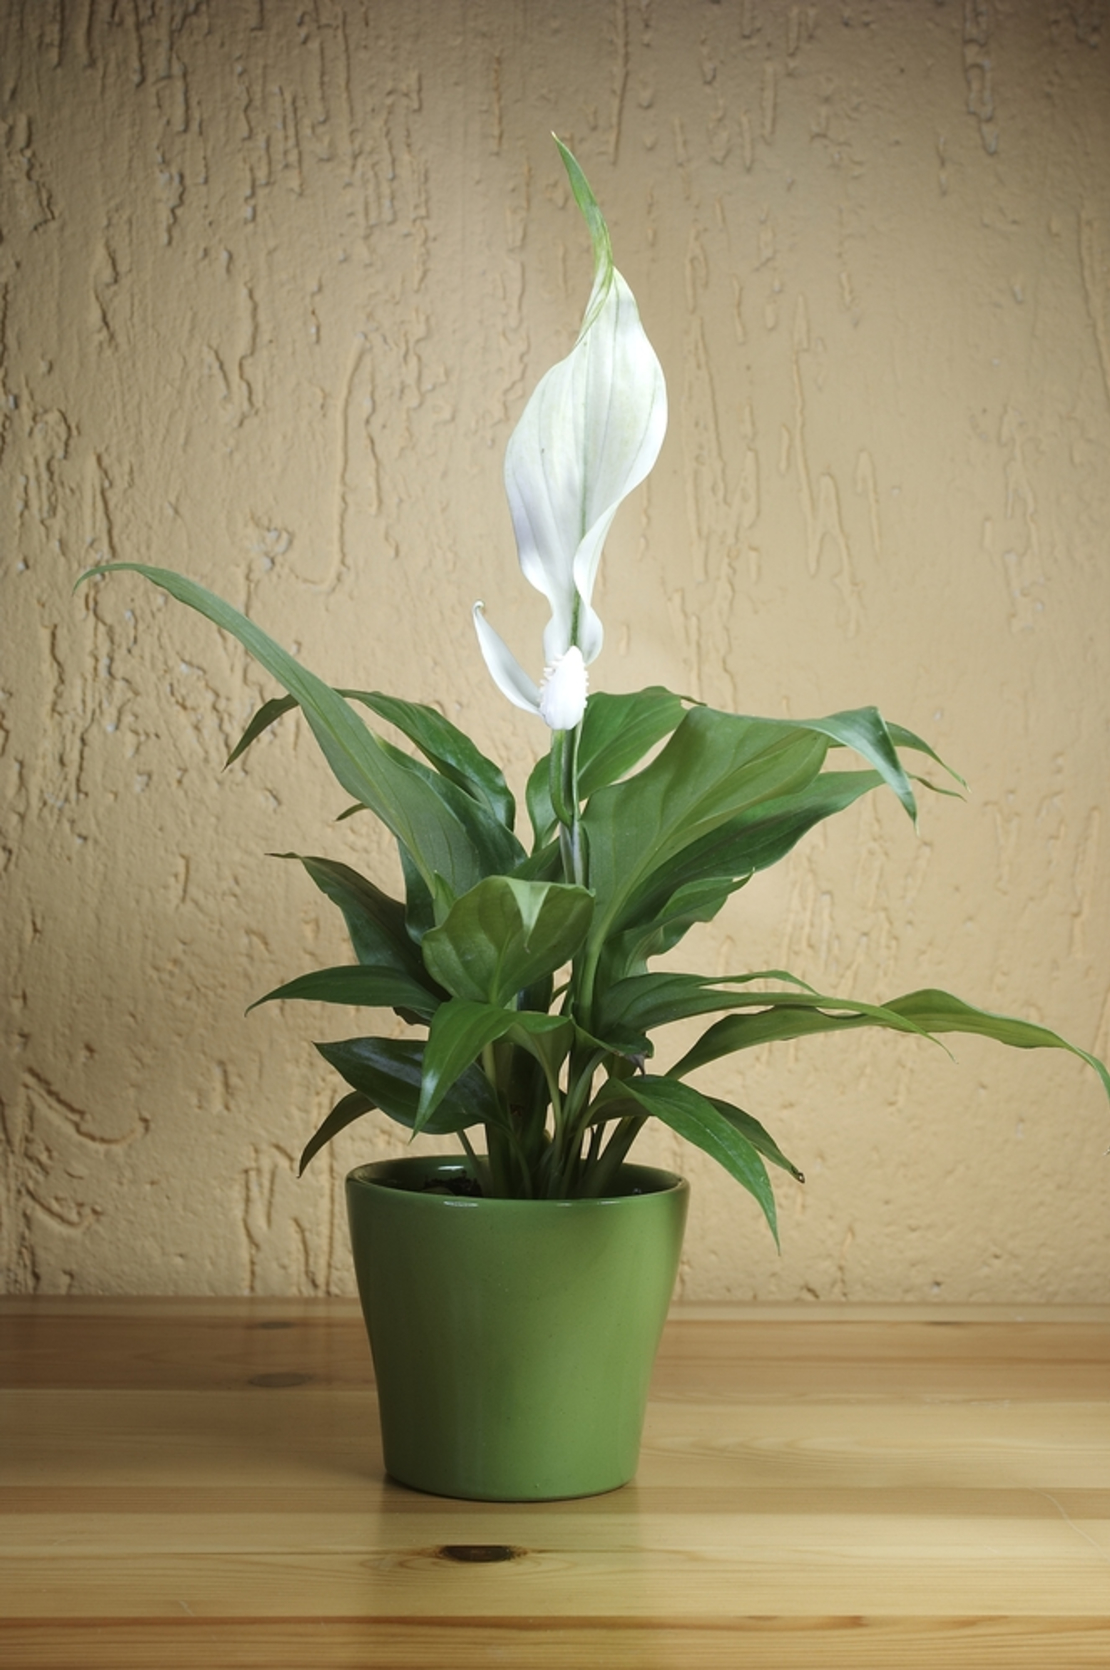 Peace lily (Spathiphyllum) with pot